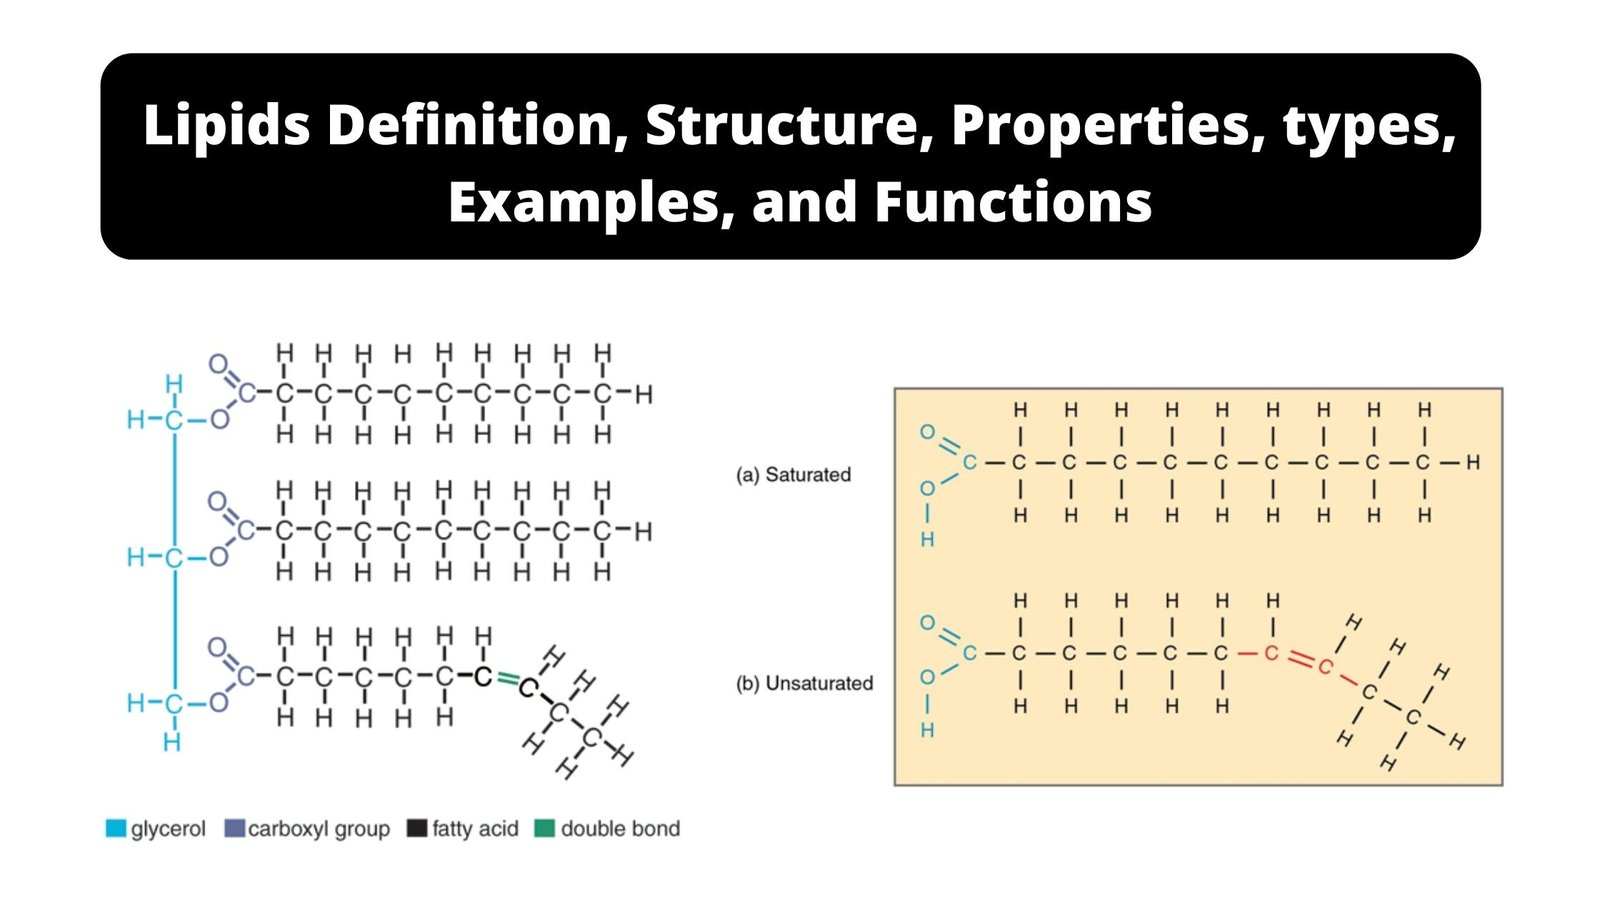 Lipids - Definition, Structure, Properties, Types, Functions, Examples